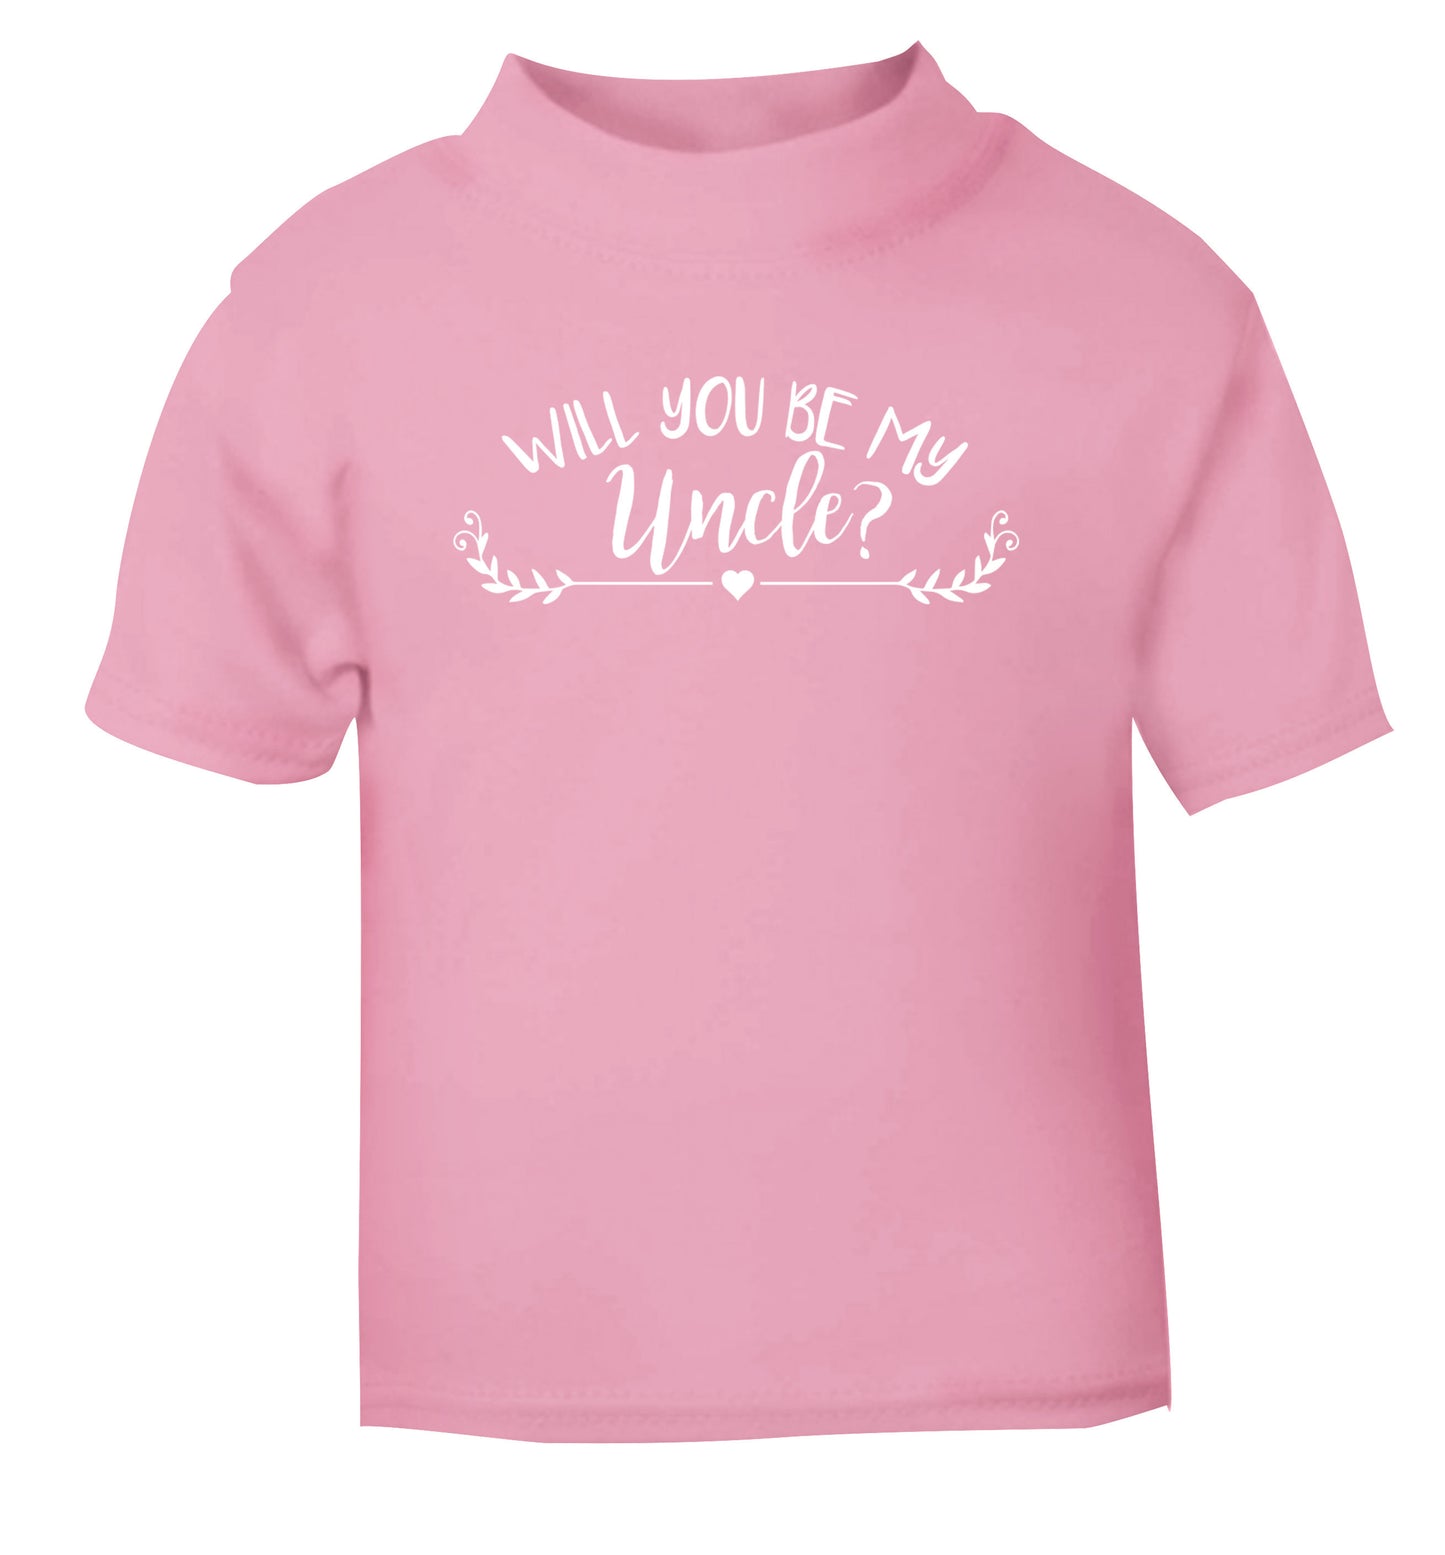 Will you be my uncle? light pink Baby Toddler Tshirt 2 Years